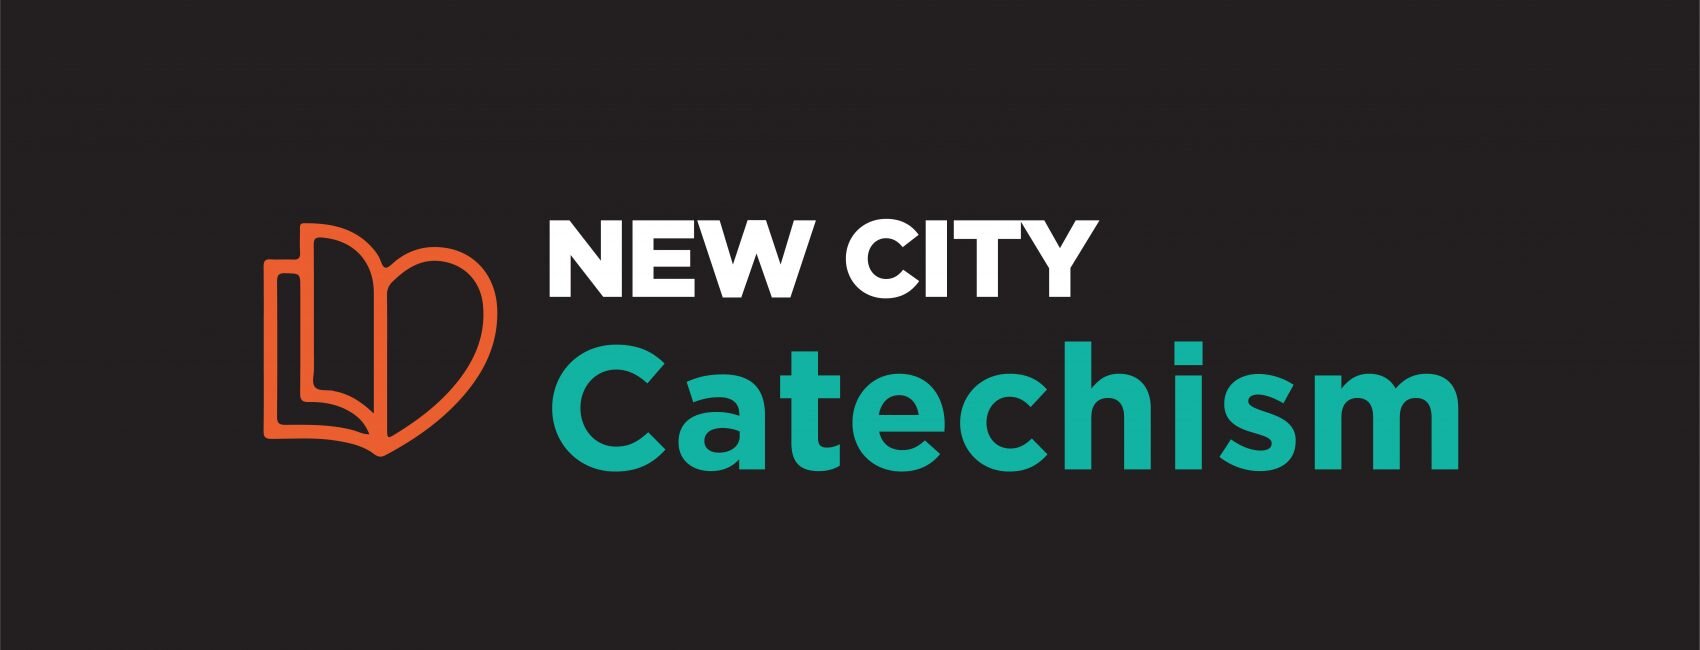 New City Catechism